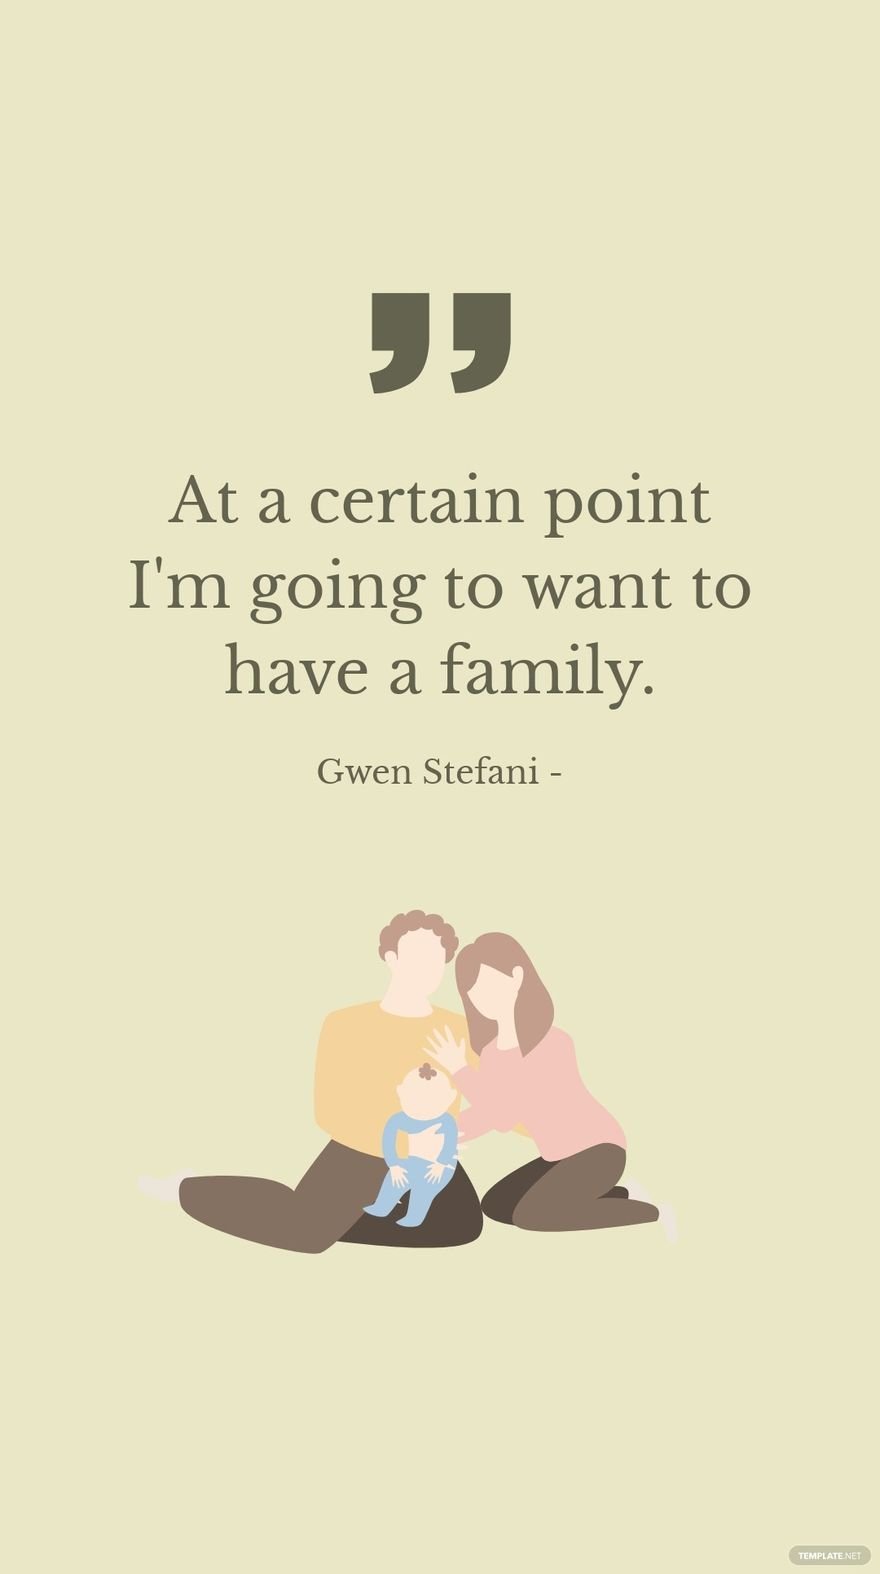 Free Gwen Stefani - At a certain point I'm going to want to have a family. in JPG